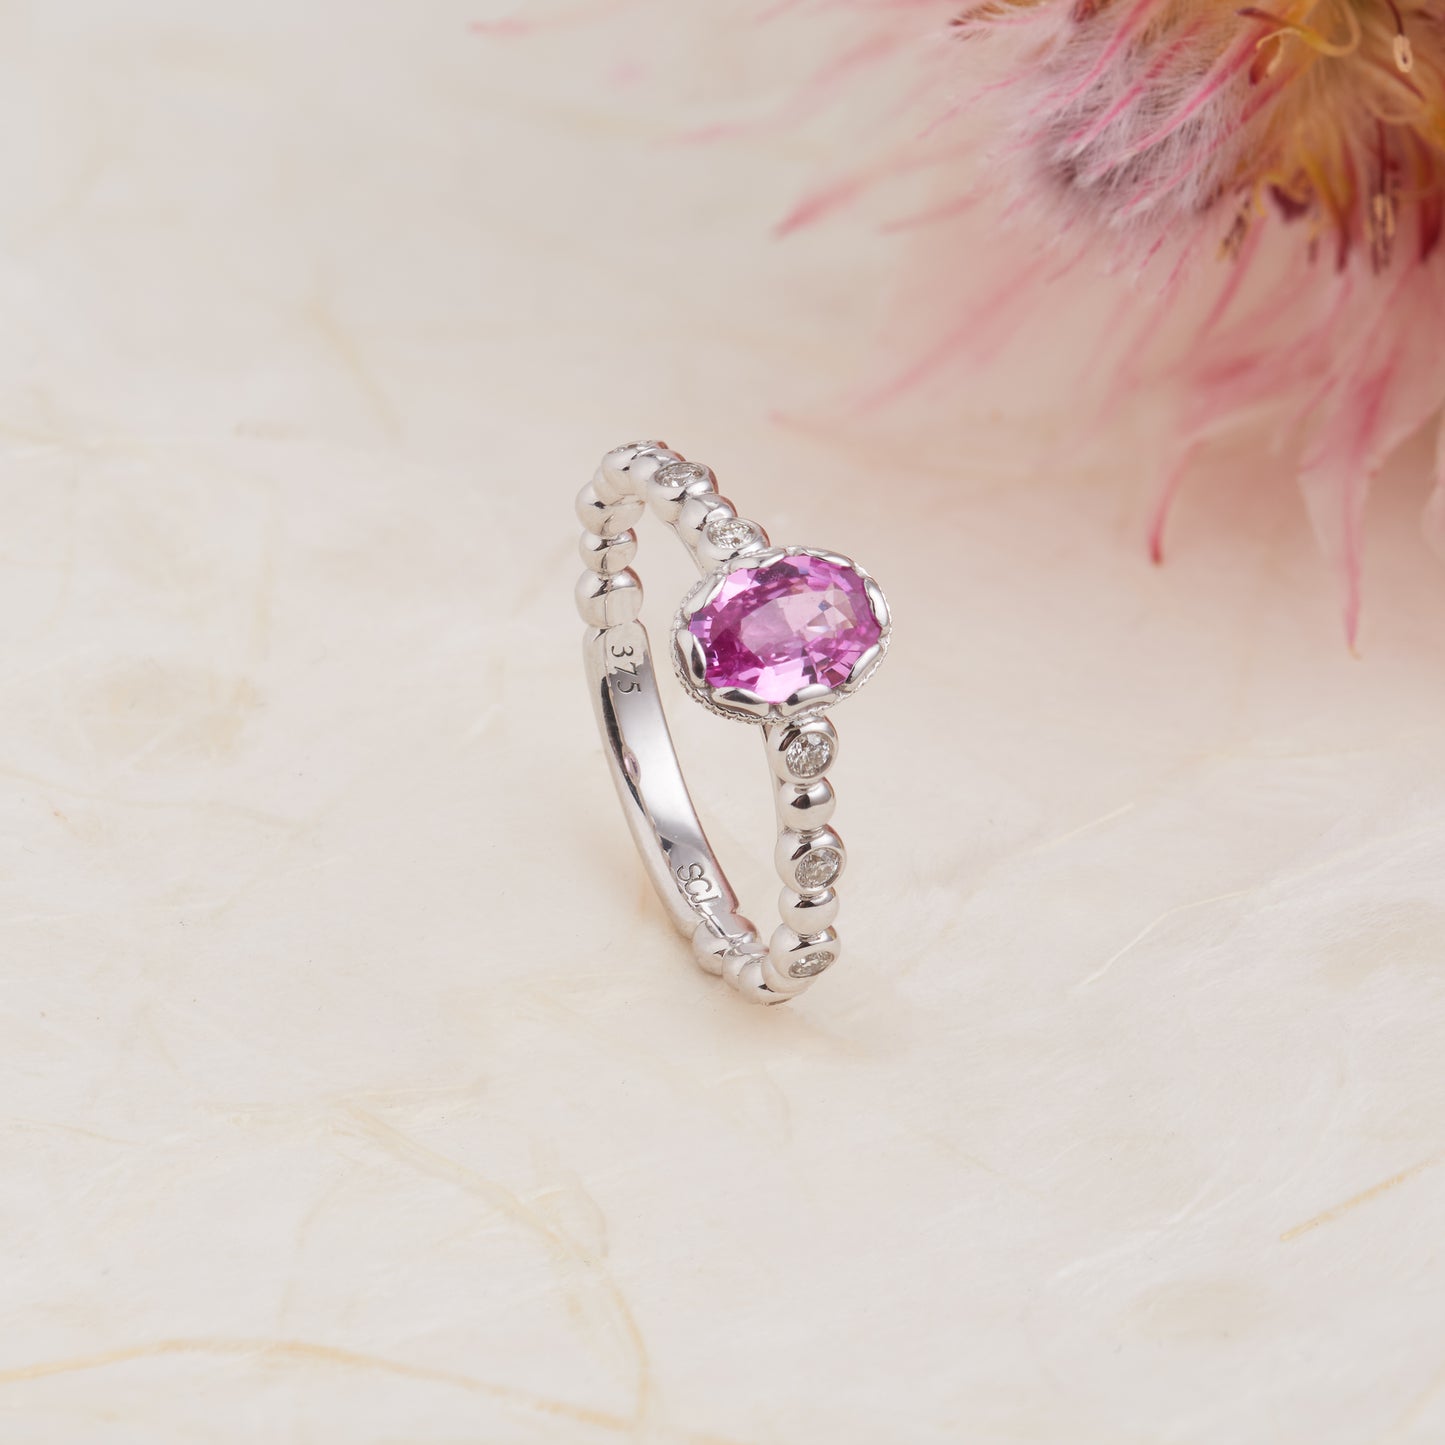 9K White Gold Oval Pink Sapphire and Diamond Vintage Inspired Ring 0.17tdw